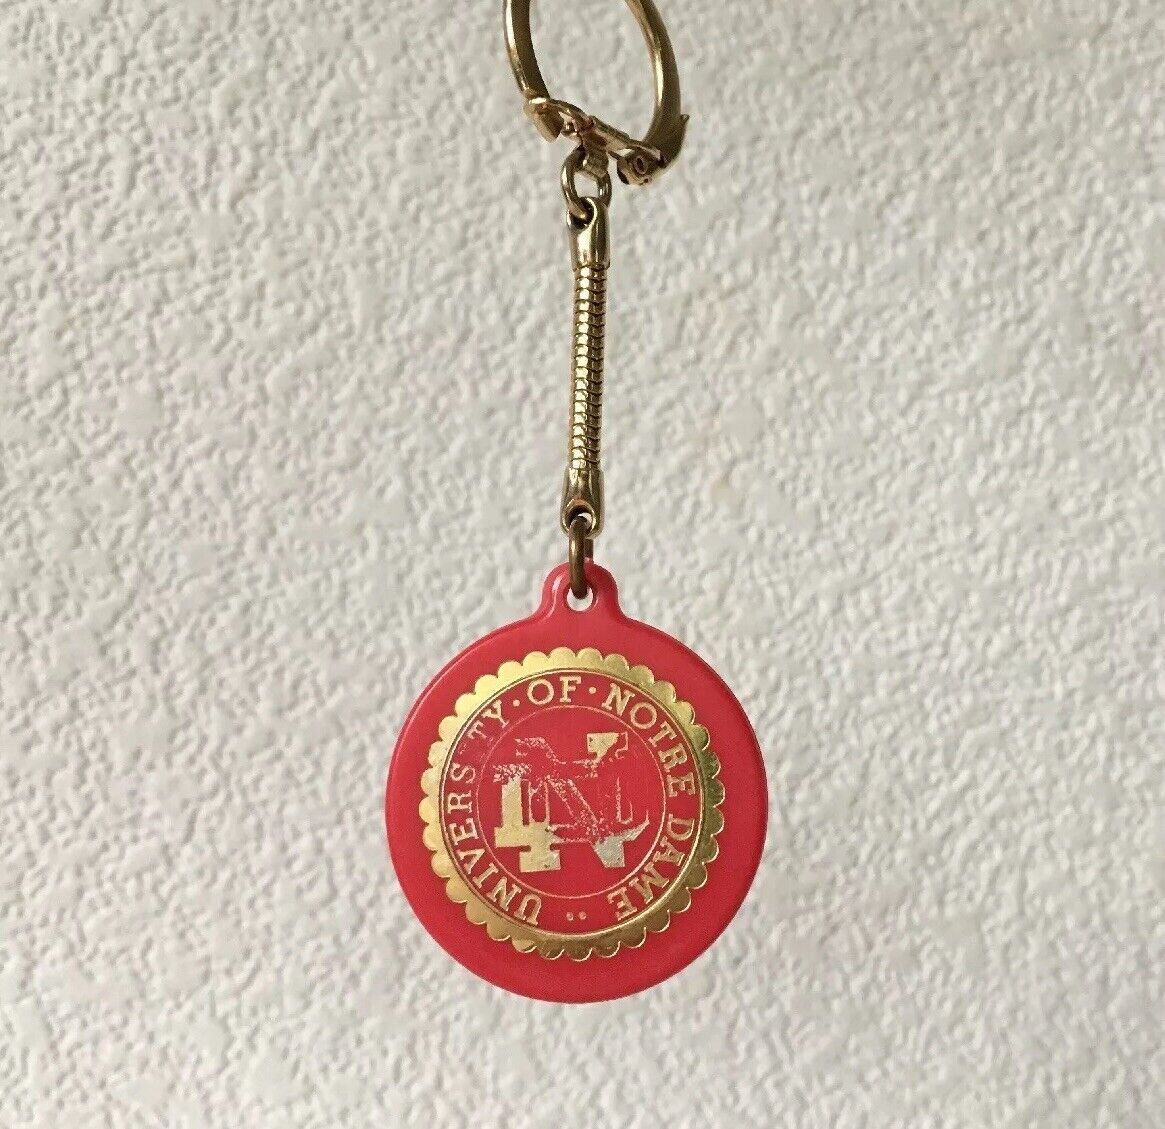 Vintage Keychain UNIVERSITY OF NOTRE DAME Key Ring Fob Indiana College